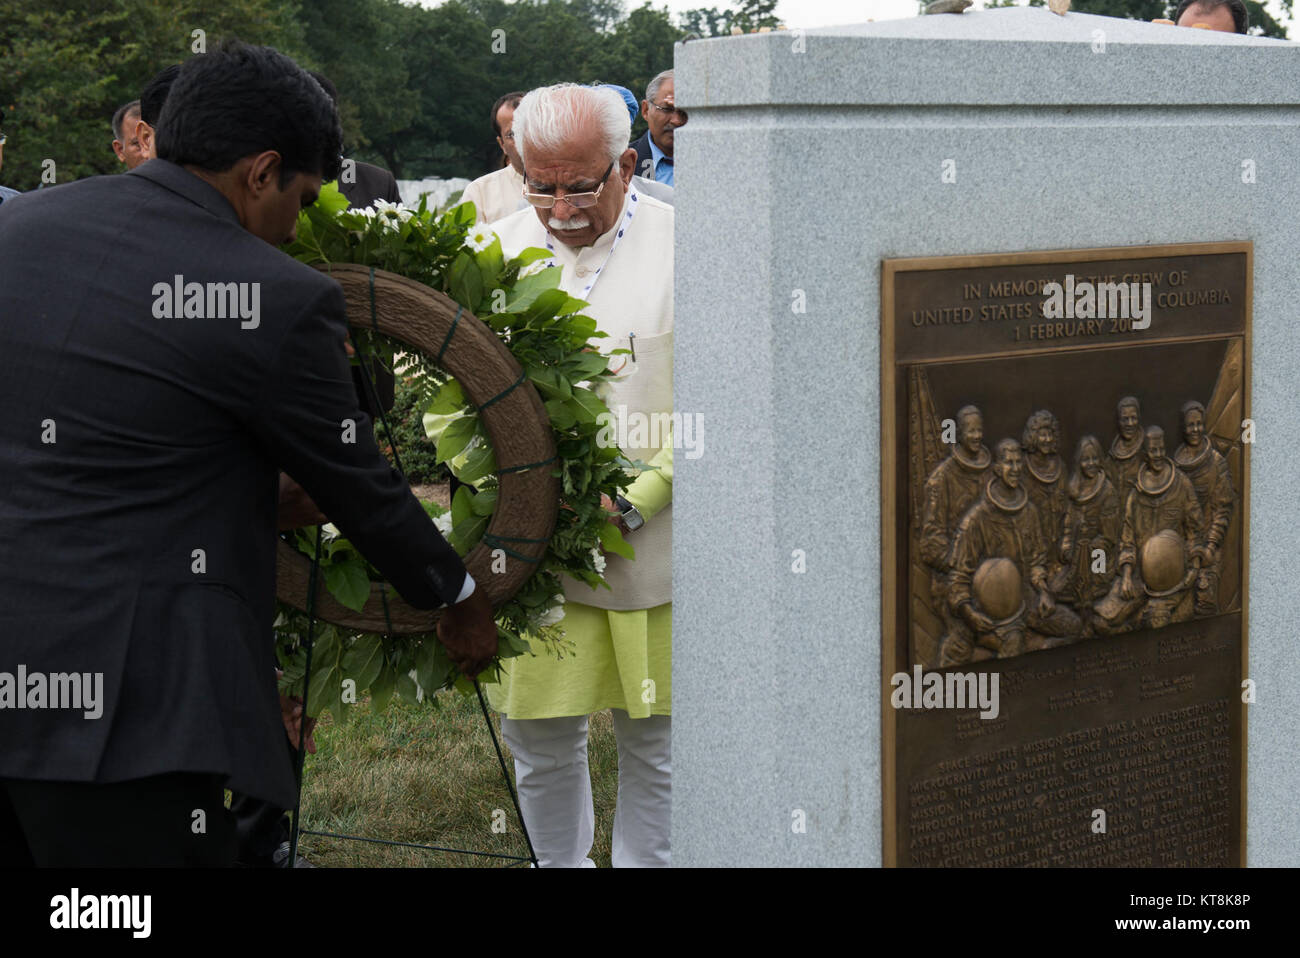 Chief Minister of Haryana, India Manohar Lal Khattar takes part in a wreath-laying ceremony at the Space Shuttle Columbia Memorial near the Memorial Amphitheater in Arlington National Cemetery, Aug. 18, 2015, in Arlington, Va. Kalpana Chawla, one of seven crew members killed during the Columbia disaster. She was born in Karnal, India, and was posthumously awarded the Congressional Space Medal of Honor, the NASA Space Flight Medal, and the NASA Distinguished Service Medal. (U.S. Army photo by Rachel Larue/released) Stock Photo